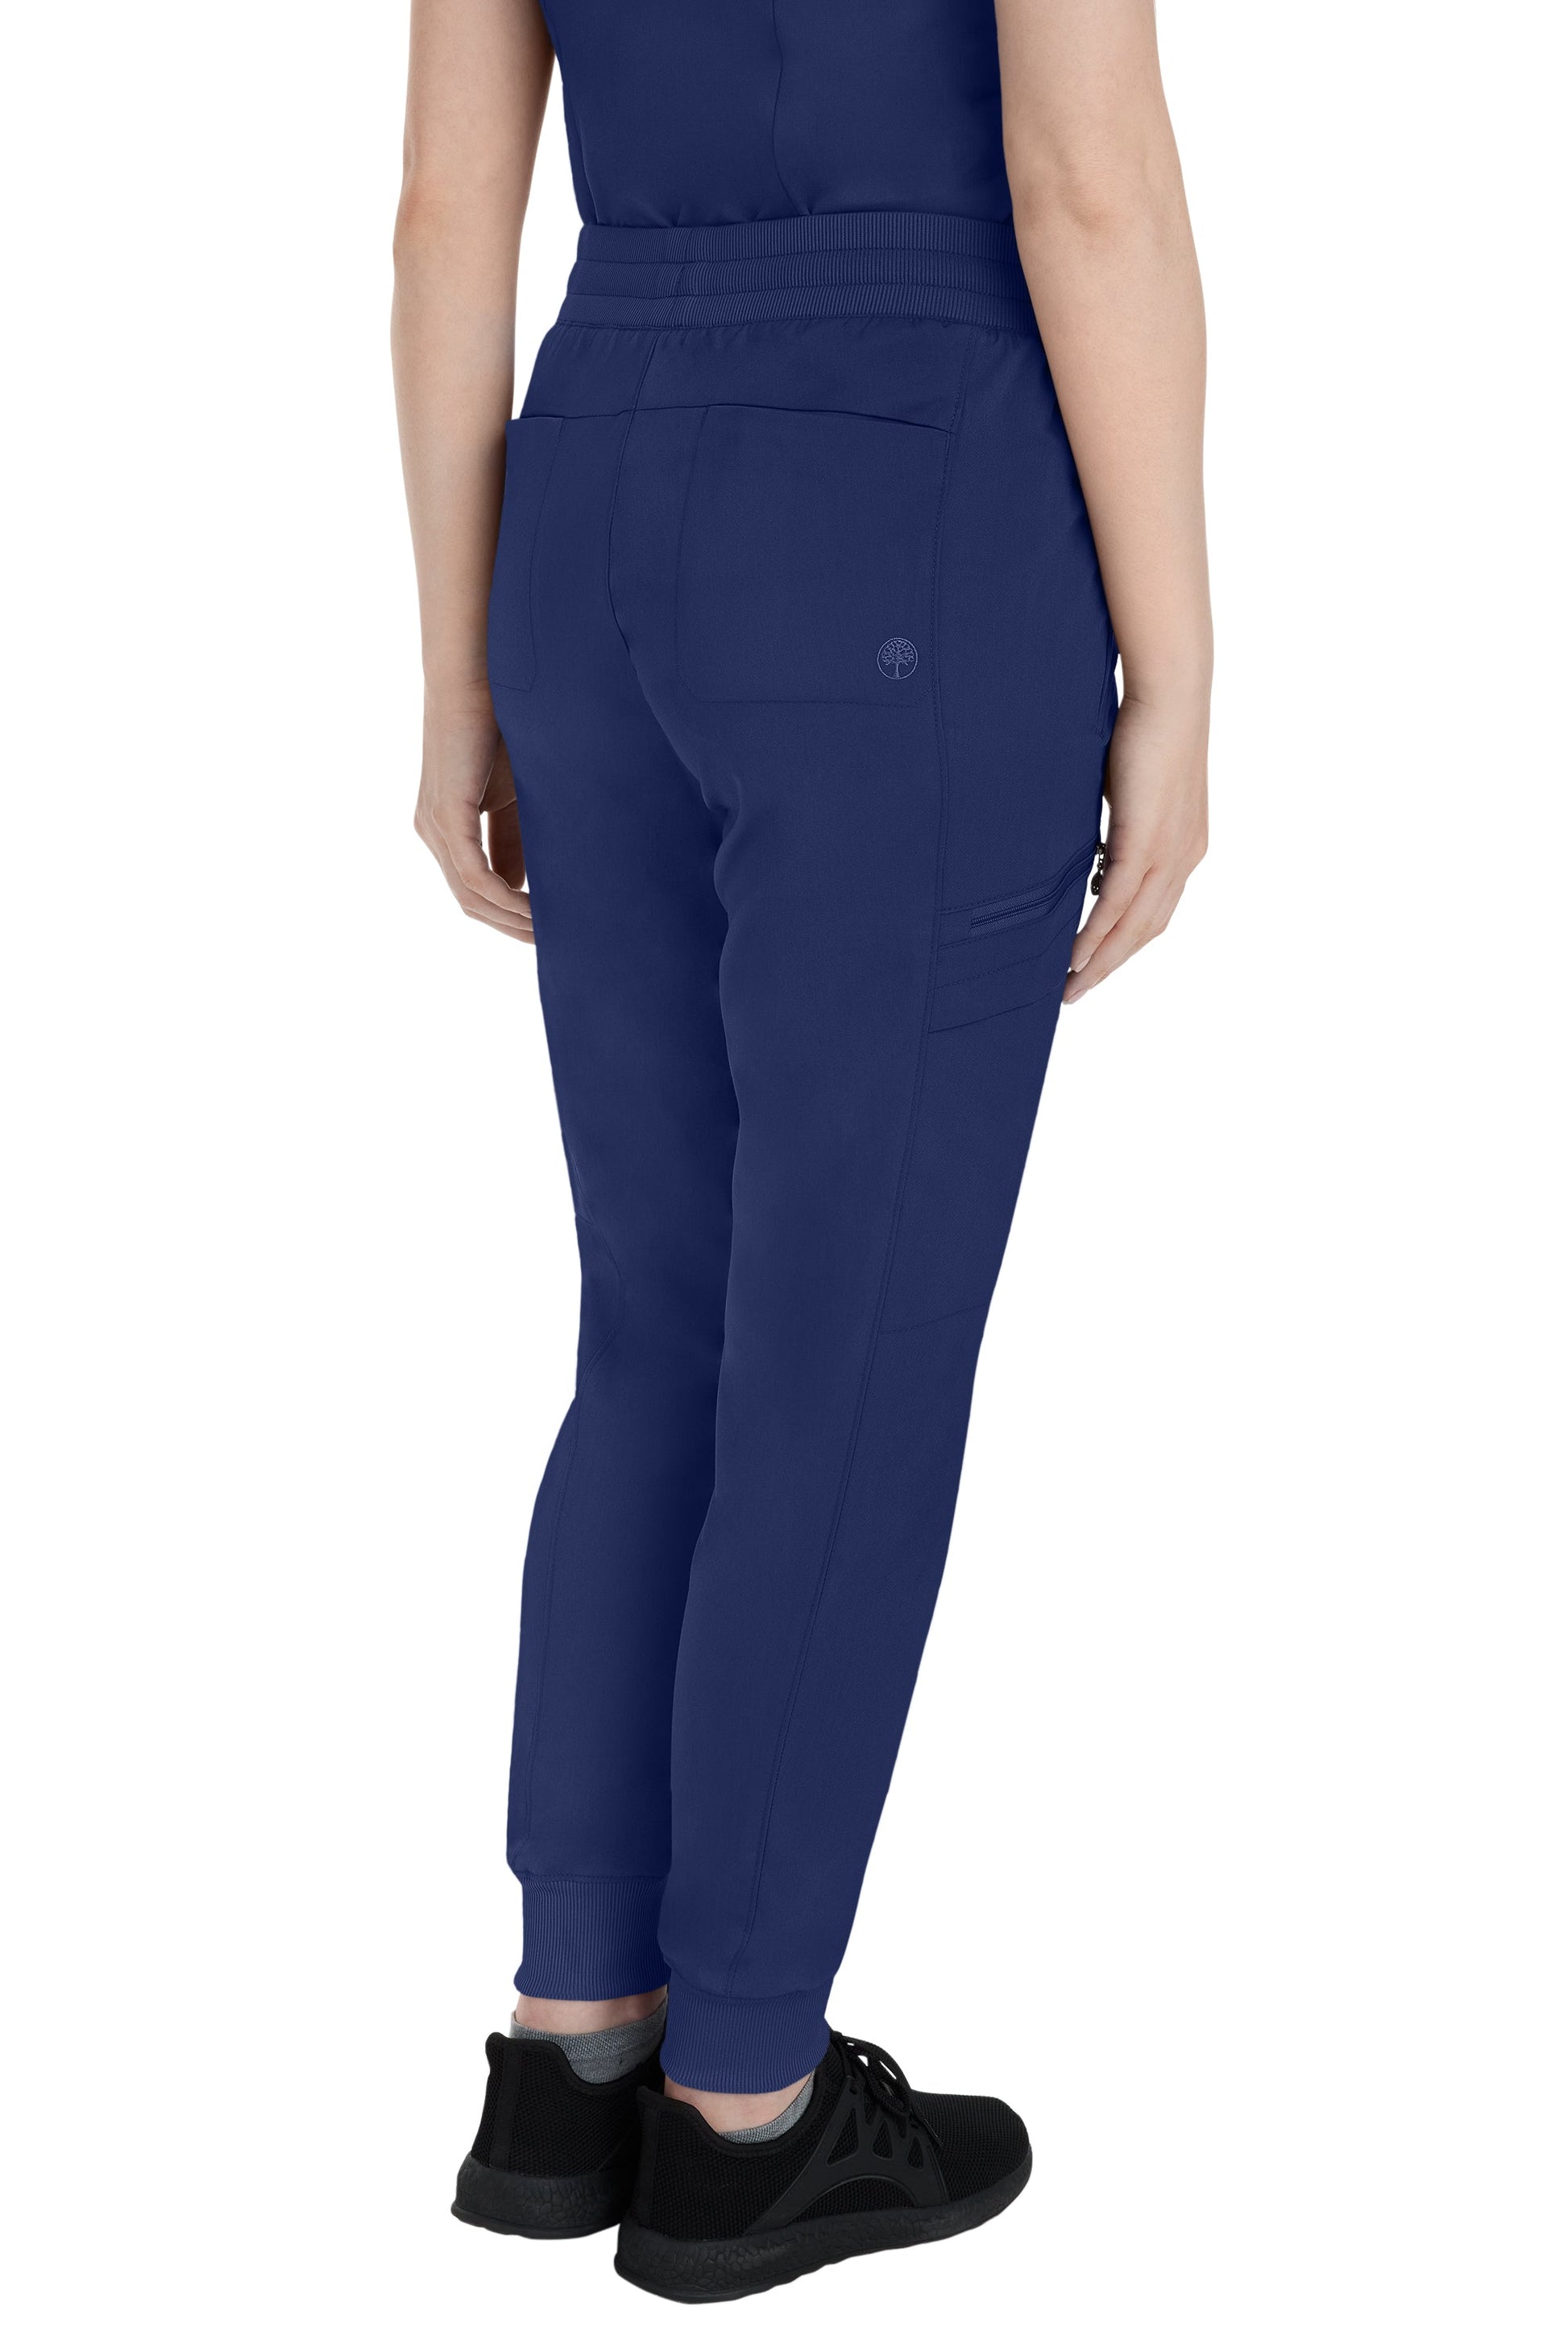 Healing Hands Purple Label Yoga 9244 Toby Jogger Pant - TALL